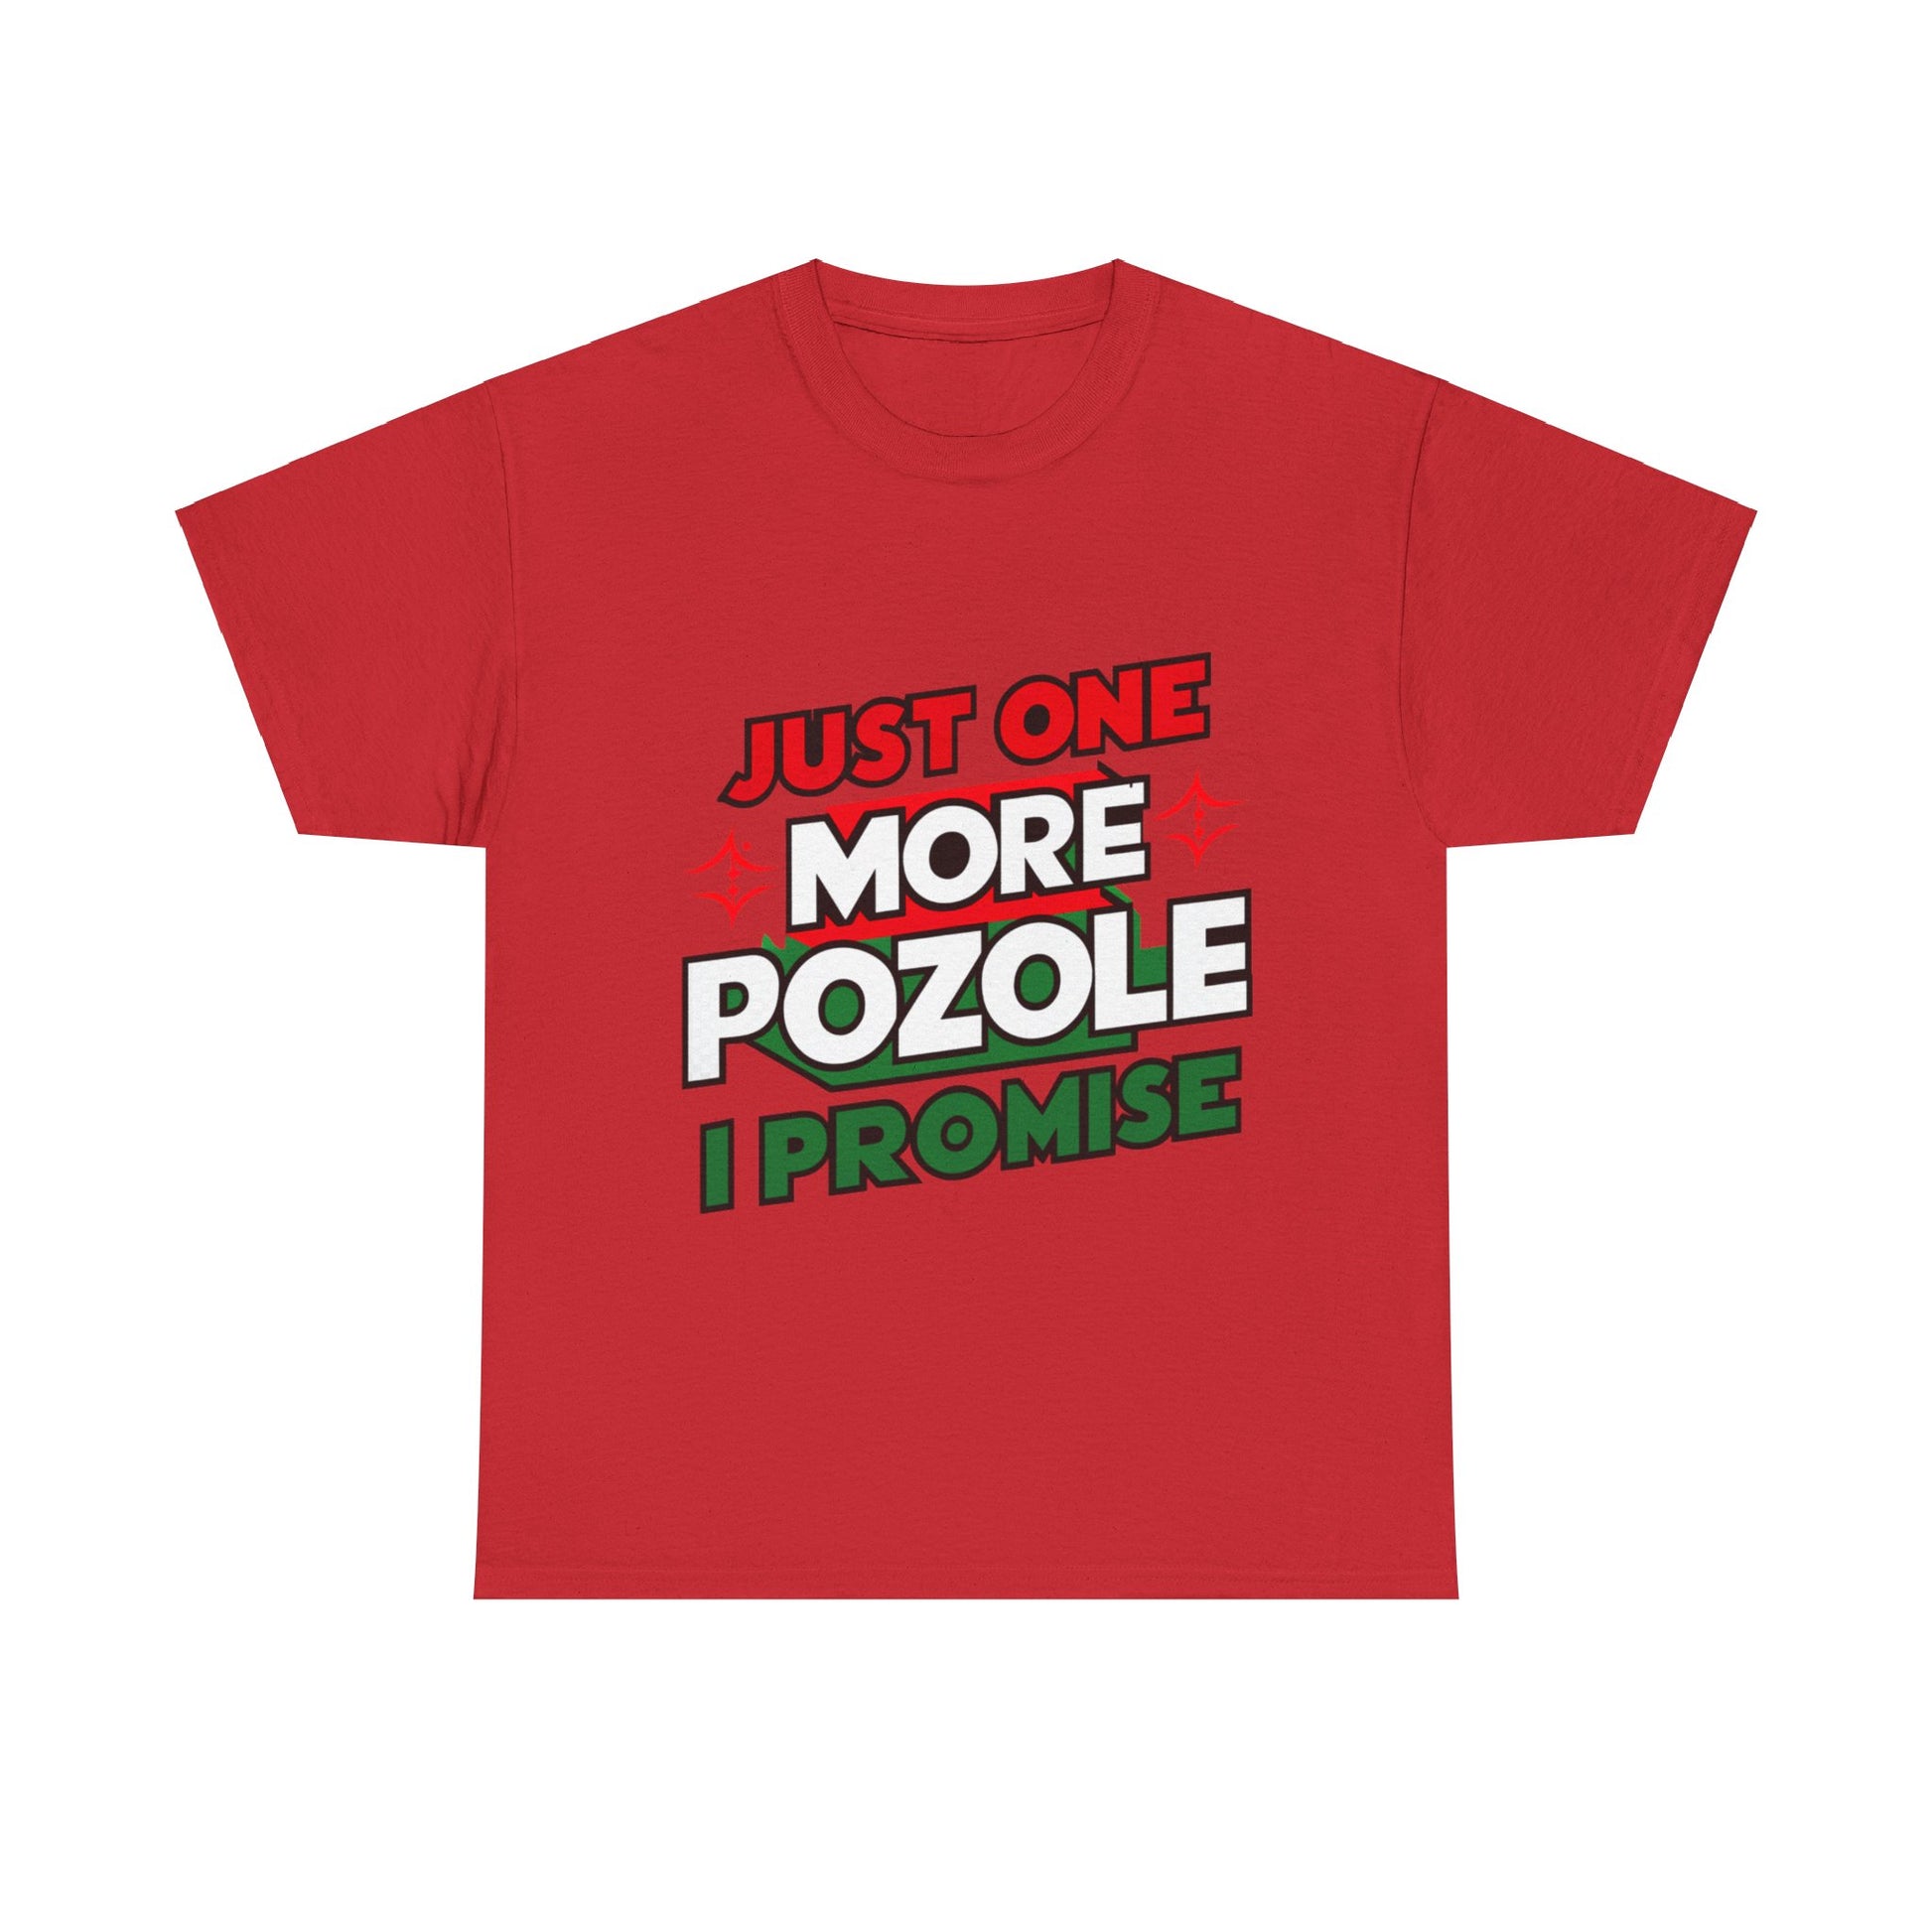 Just One More Pozole I Promise Mexican Food Graphic Unisex Heavy Cotton Tee Cotton Funny Humorous Graphic Soft Premium Unisex Men Women Red T-shirt Birthday Gift-7